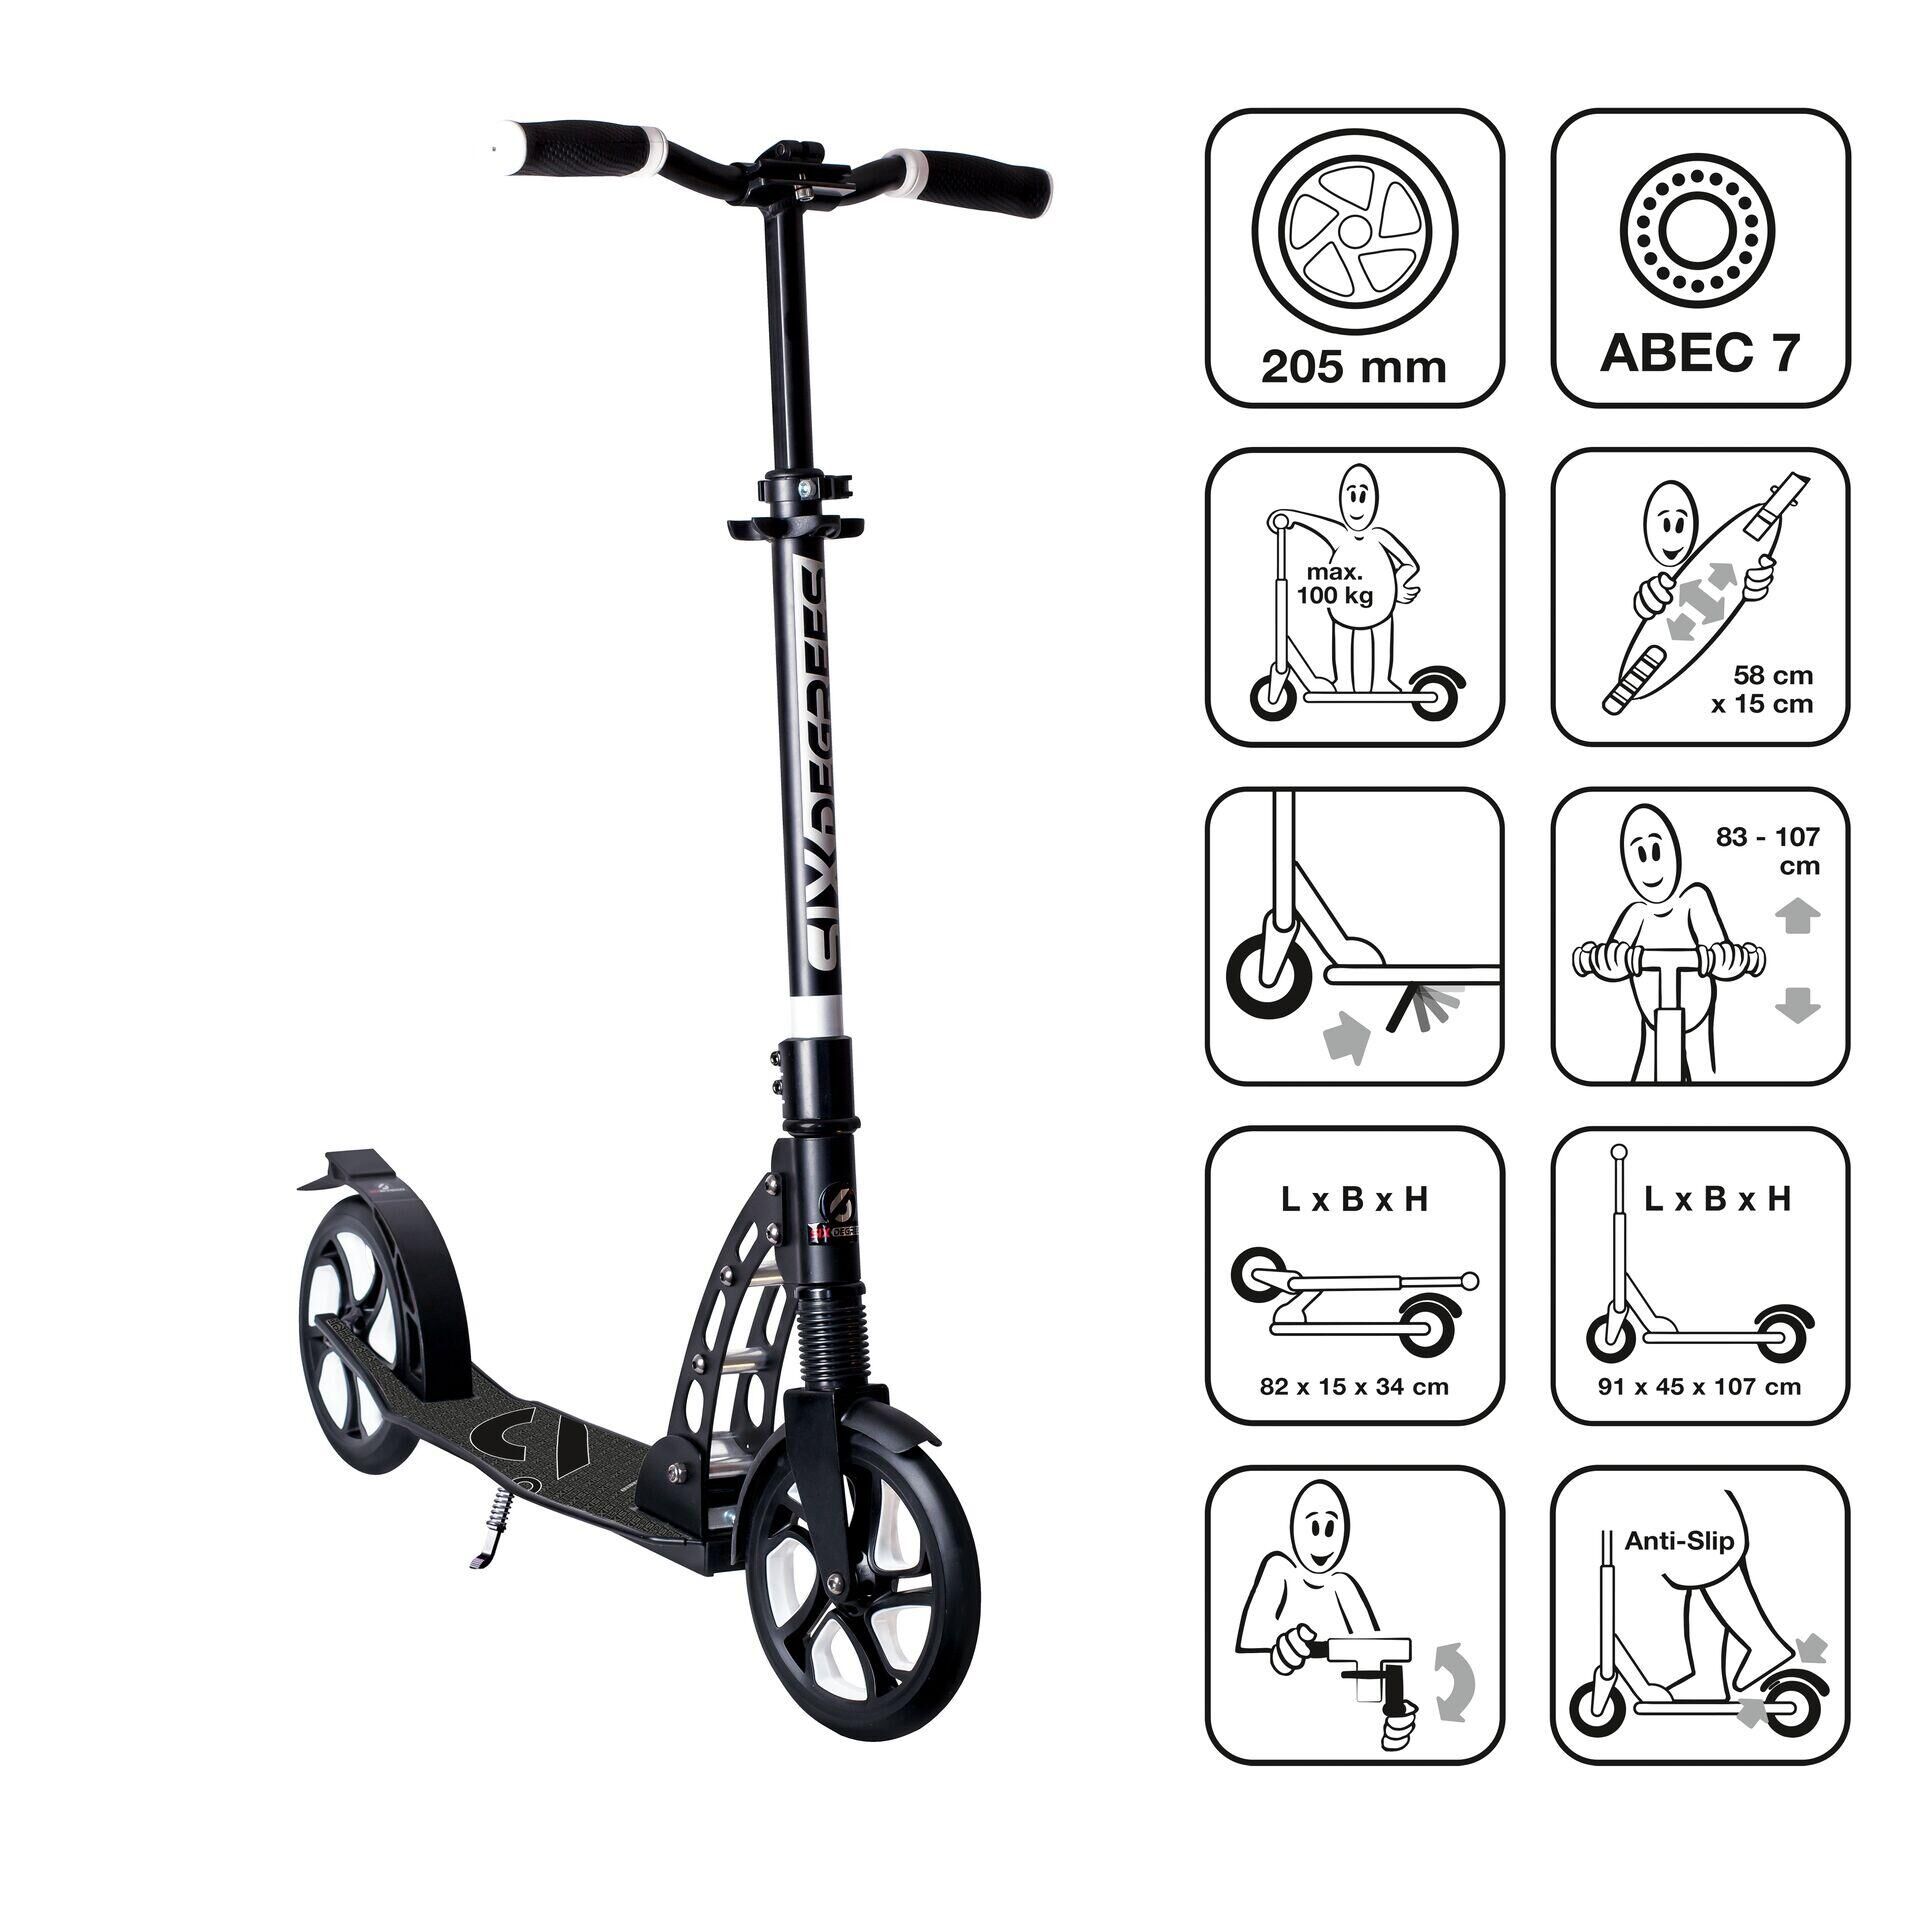 SIX DEGREES SIX DEGREES Kick Scooter with Suspension 205mm black